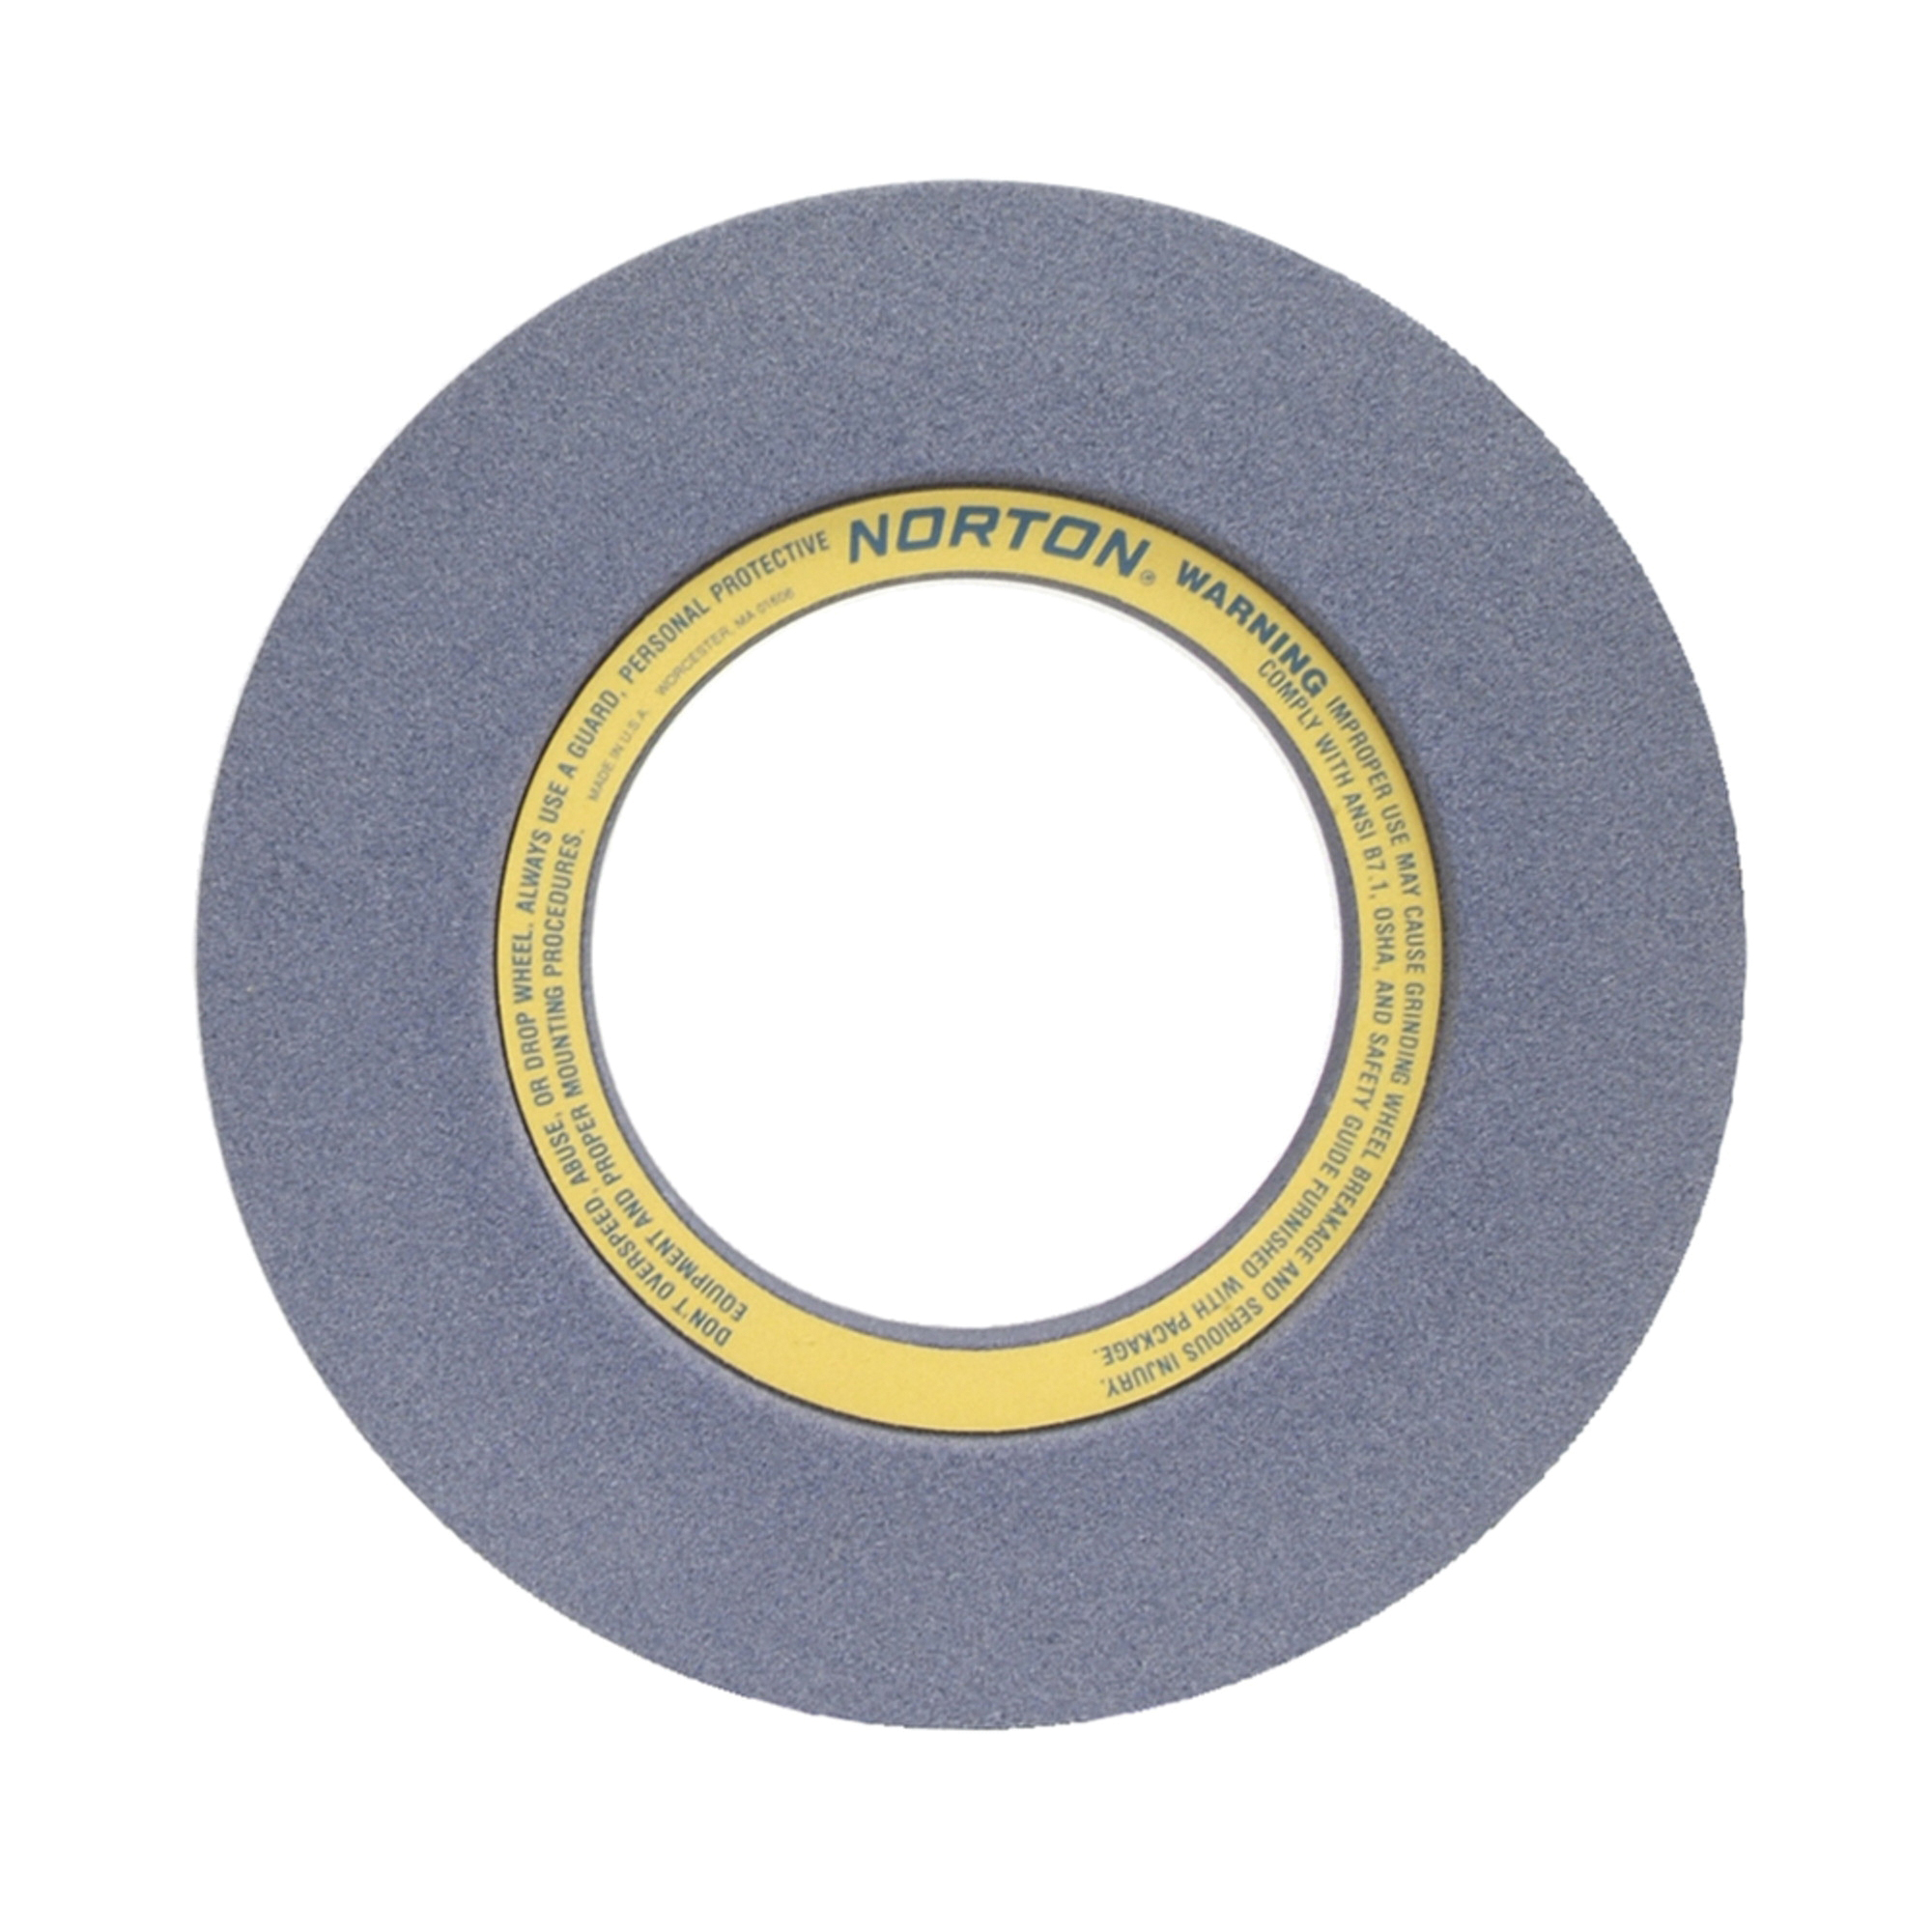 Norton® 69078665686 32A 2-Side Recessed Surface and Cylindrical Grinding Wheel, 20 in Dia x 3 in THK, 8 in Center Hole, 46 Grit, Aluminum Oxide Abrasive